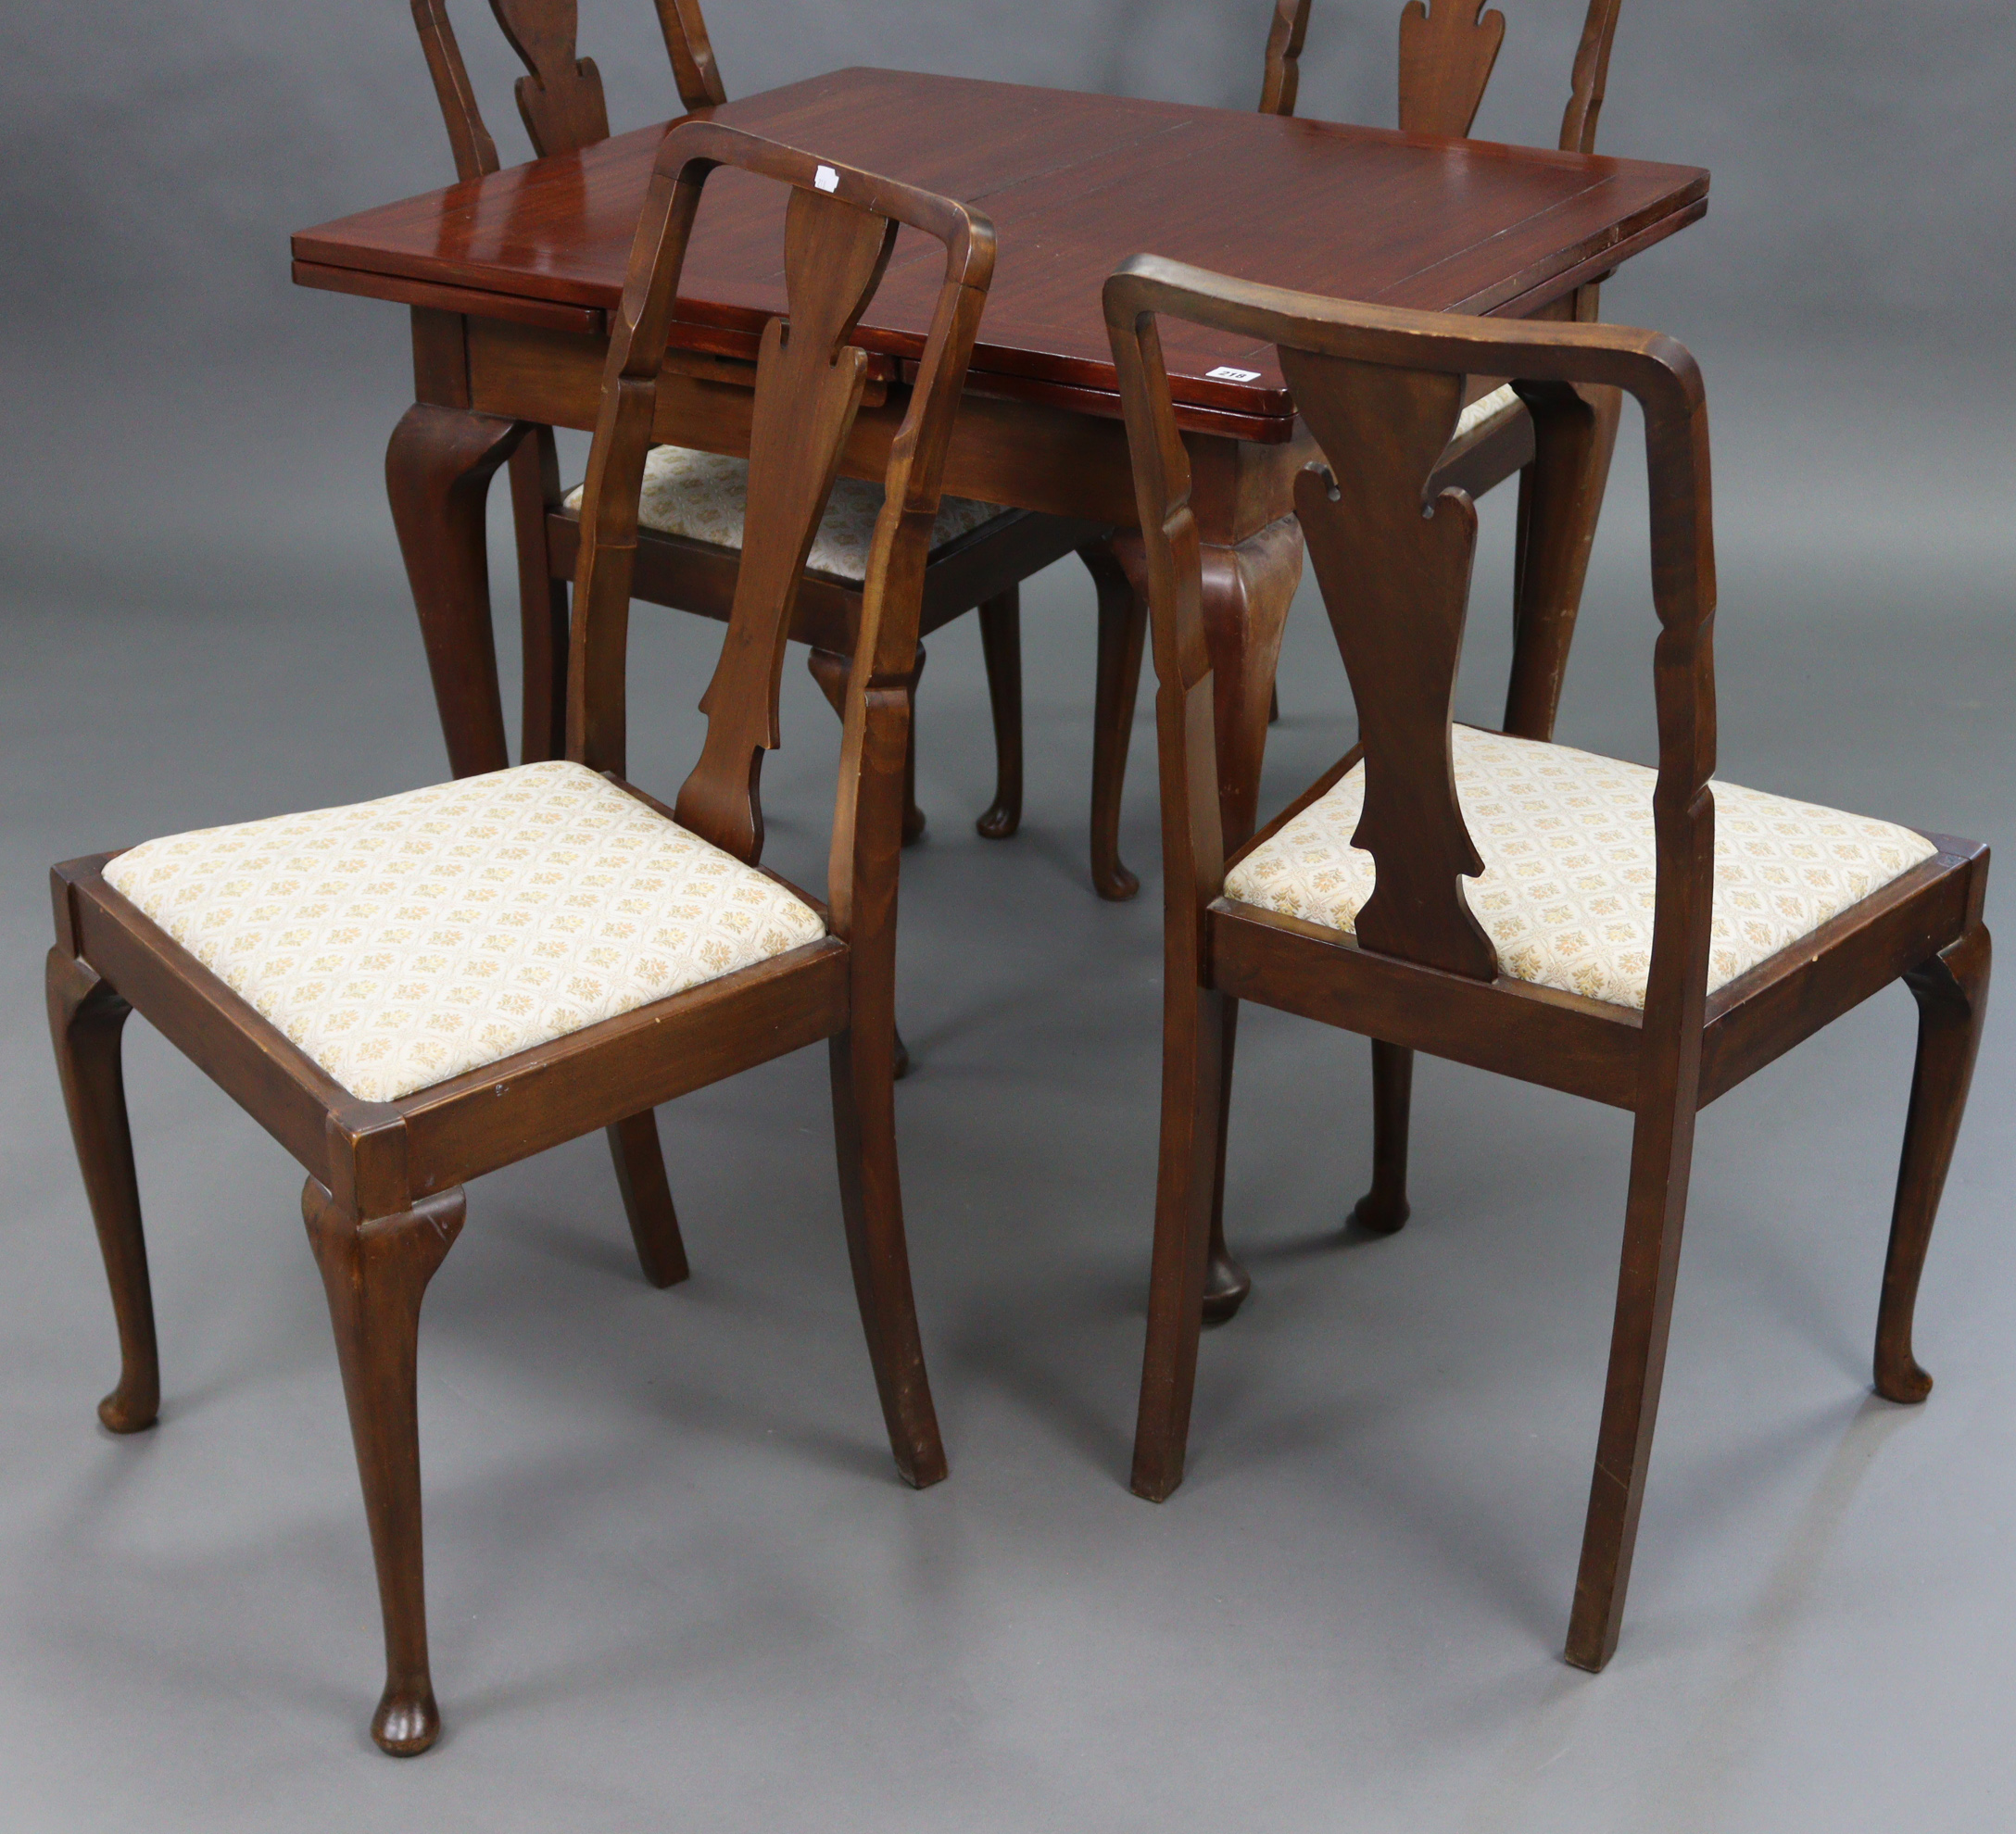 A mahogany draw-leaf dining table on four slender cabriole legs & pad feet, 32” x 57” (open), & a - Image 2 of 6